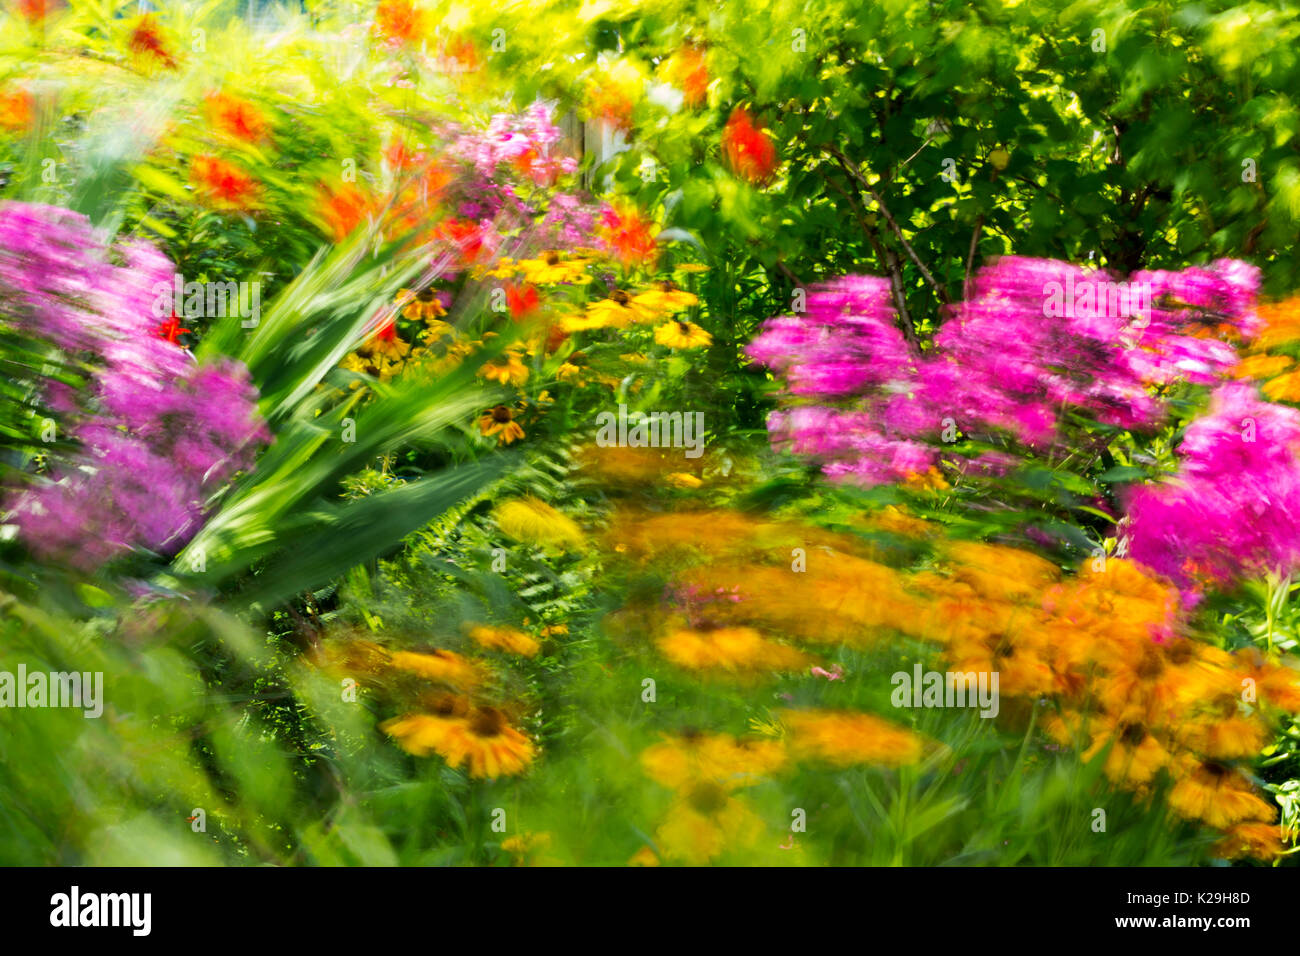 Phlox and other summer flowers blowing in the wind in a garden, Clitheroe, UK. Stock Photo